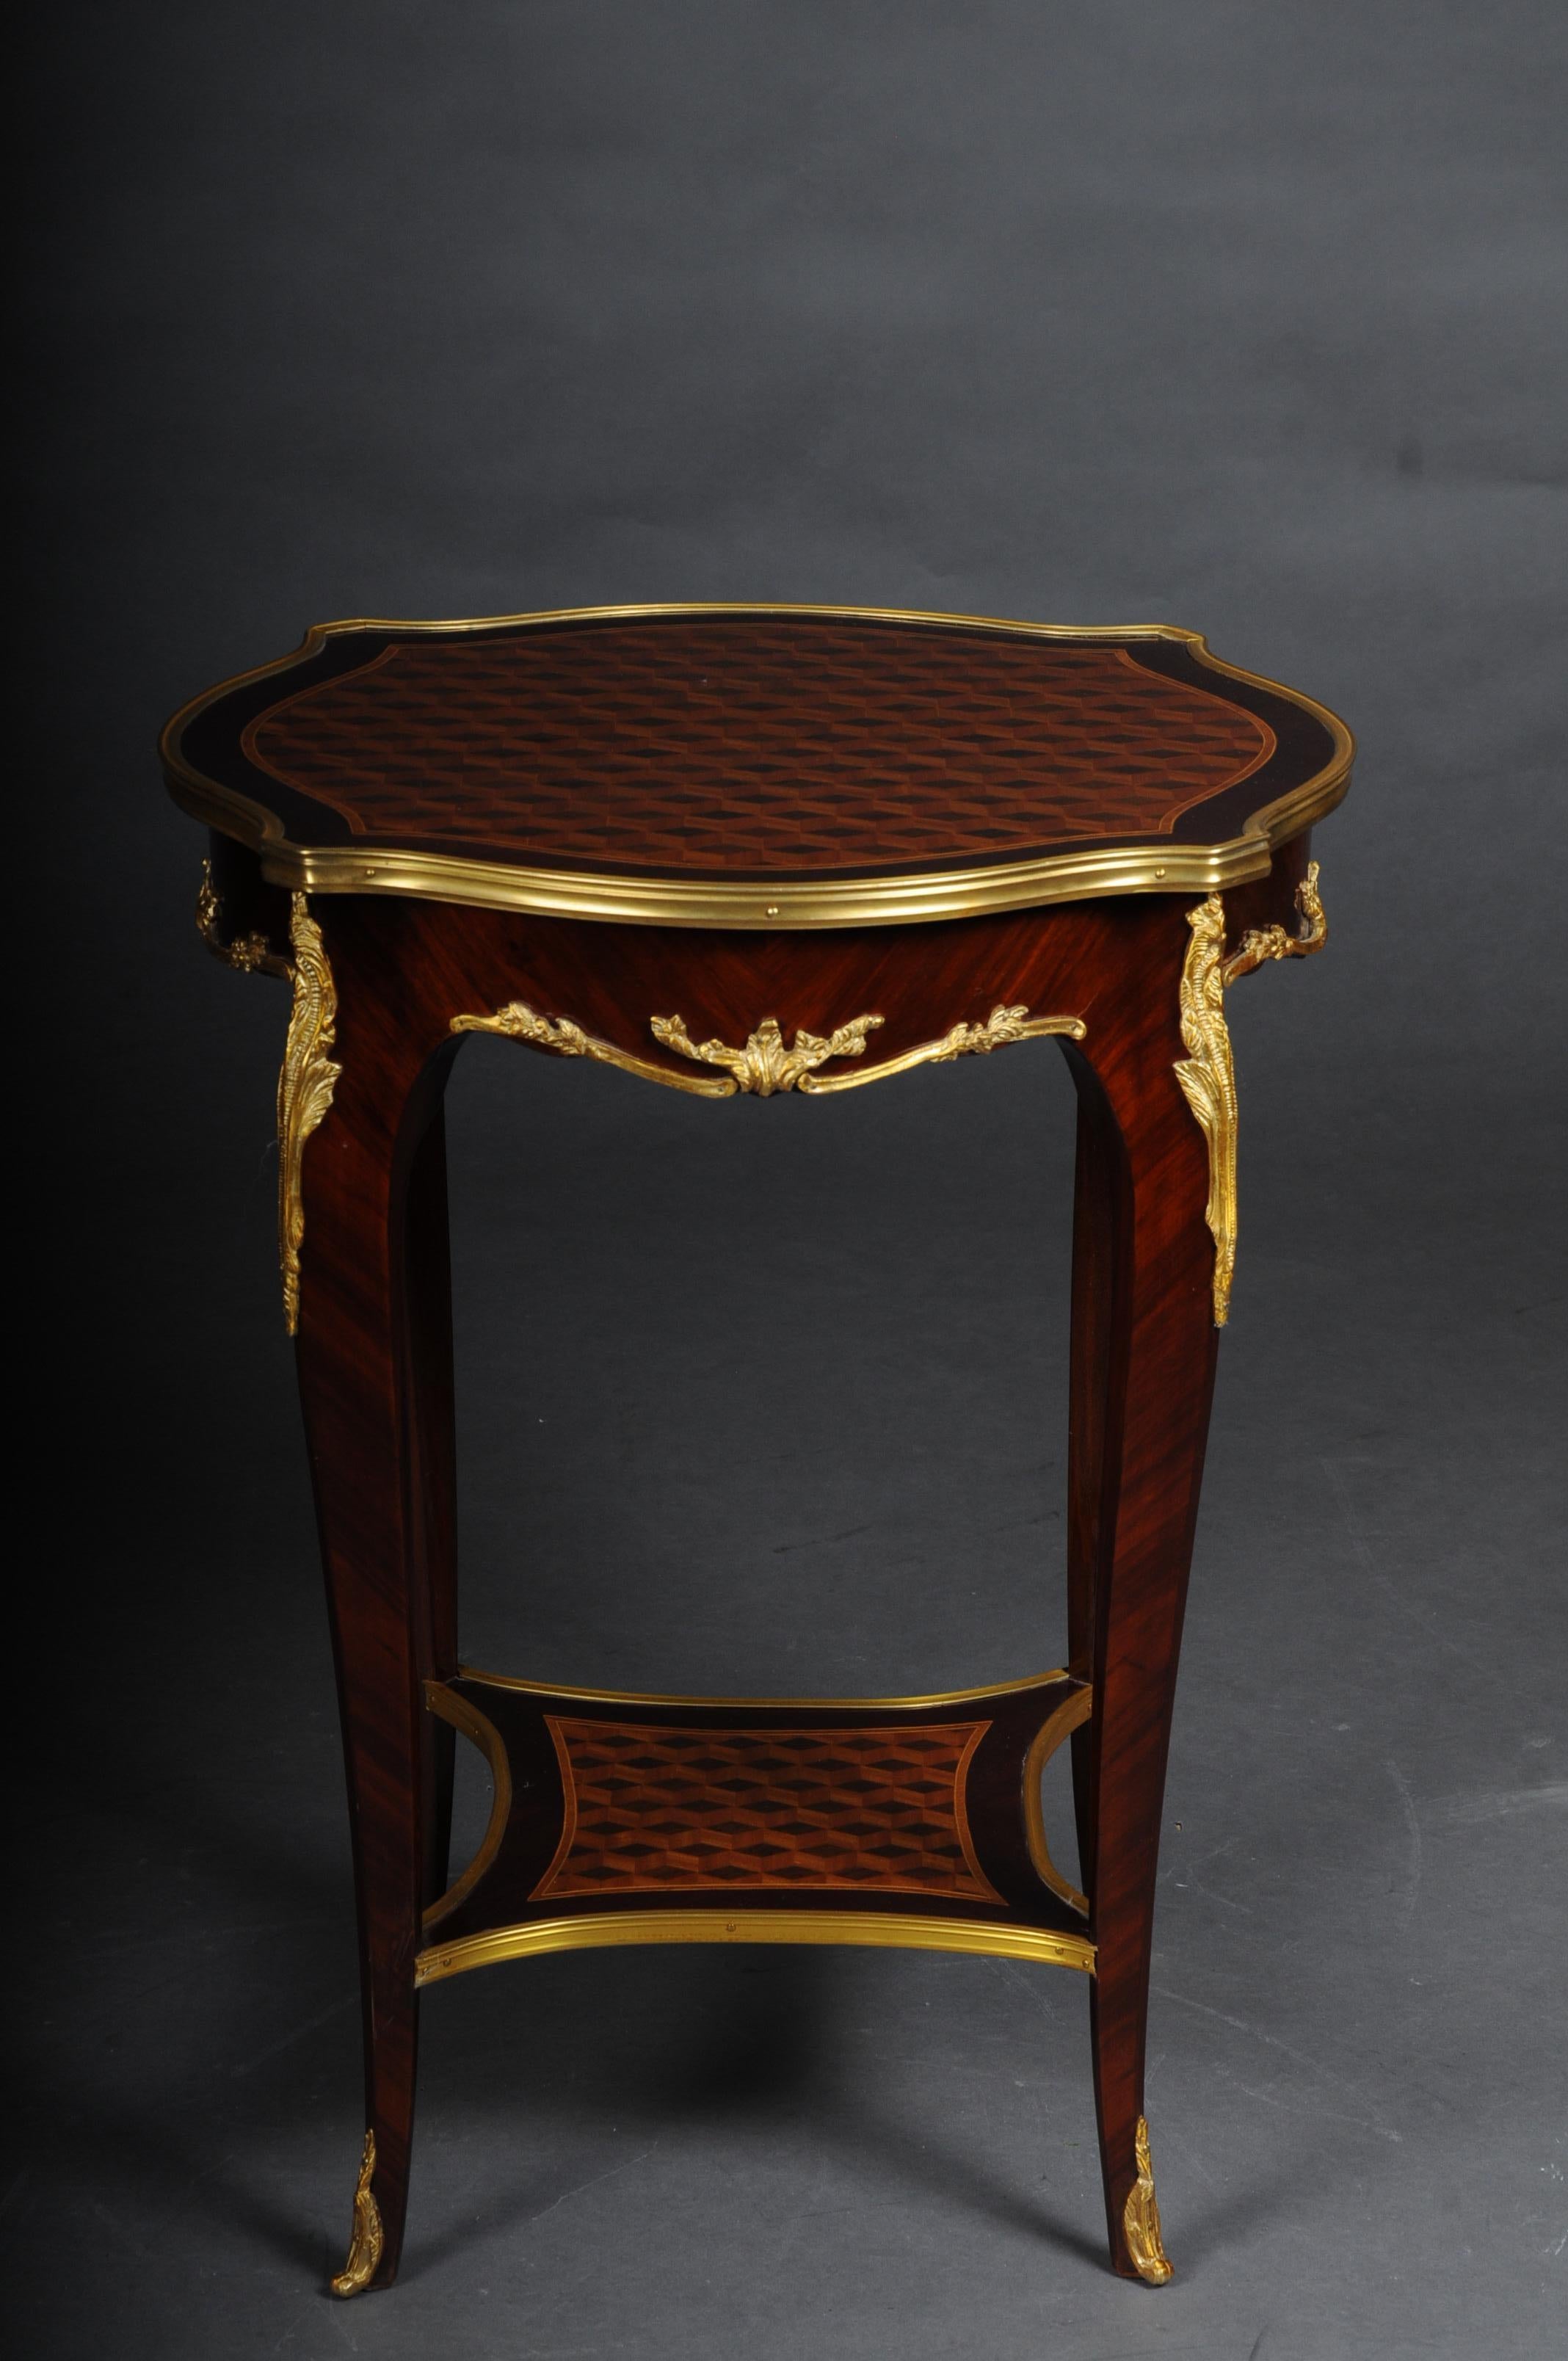 Beautiful salon side table in Louis XV after F. Linke

Veneer on solid beech, daintily finished, body, flanked by solid corner strips on high, elegantly curved legs with bronze fittings ending in sabots. Slightly protruding, round marble top plate